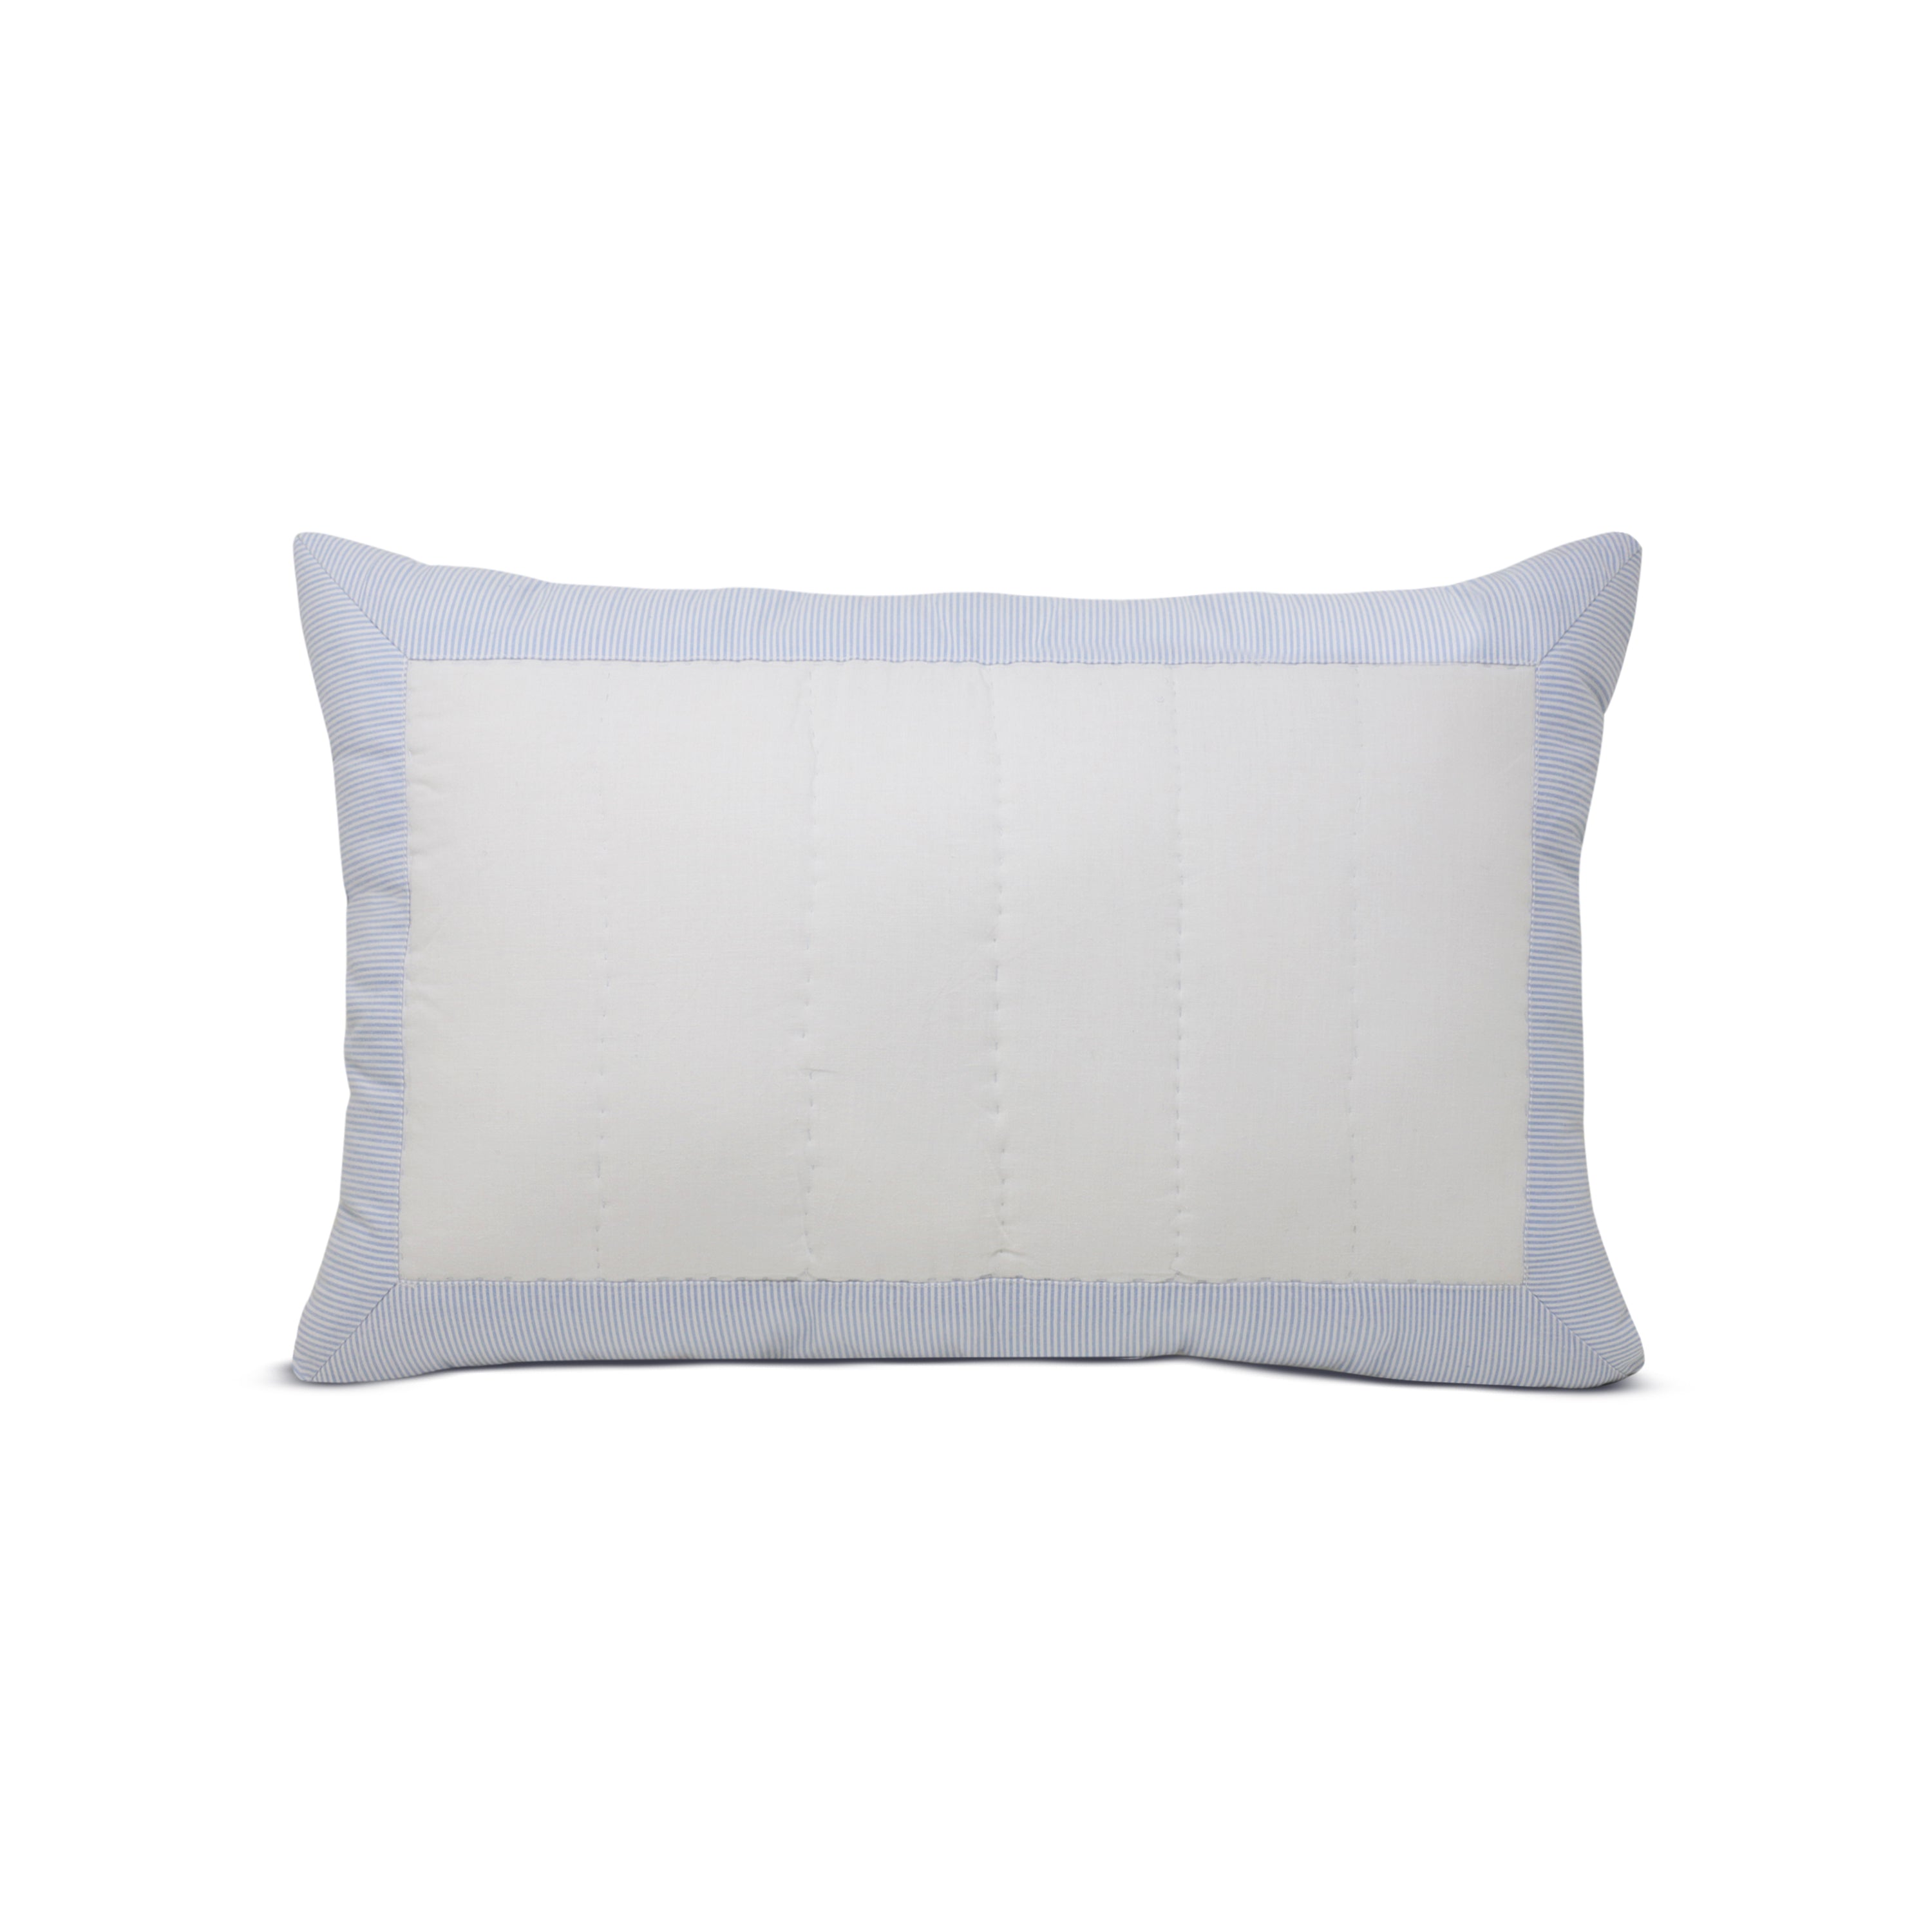 White cotton sham with blue striped boarder. The shams are available in multiple sizes and can be purchased separately.